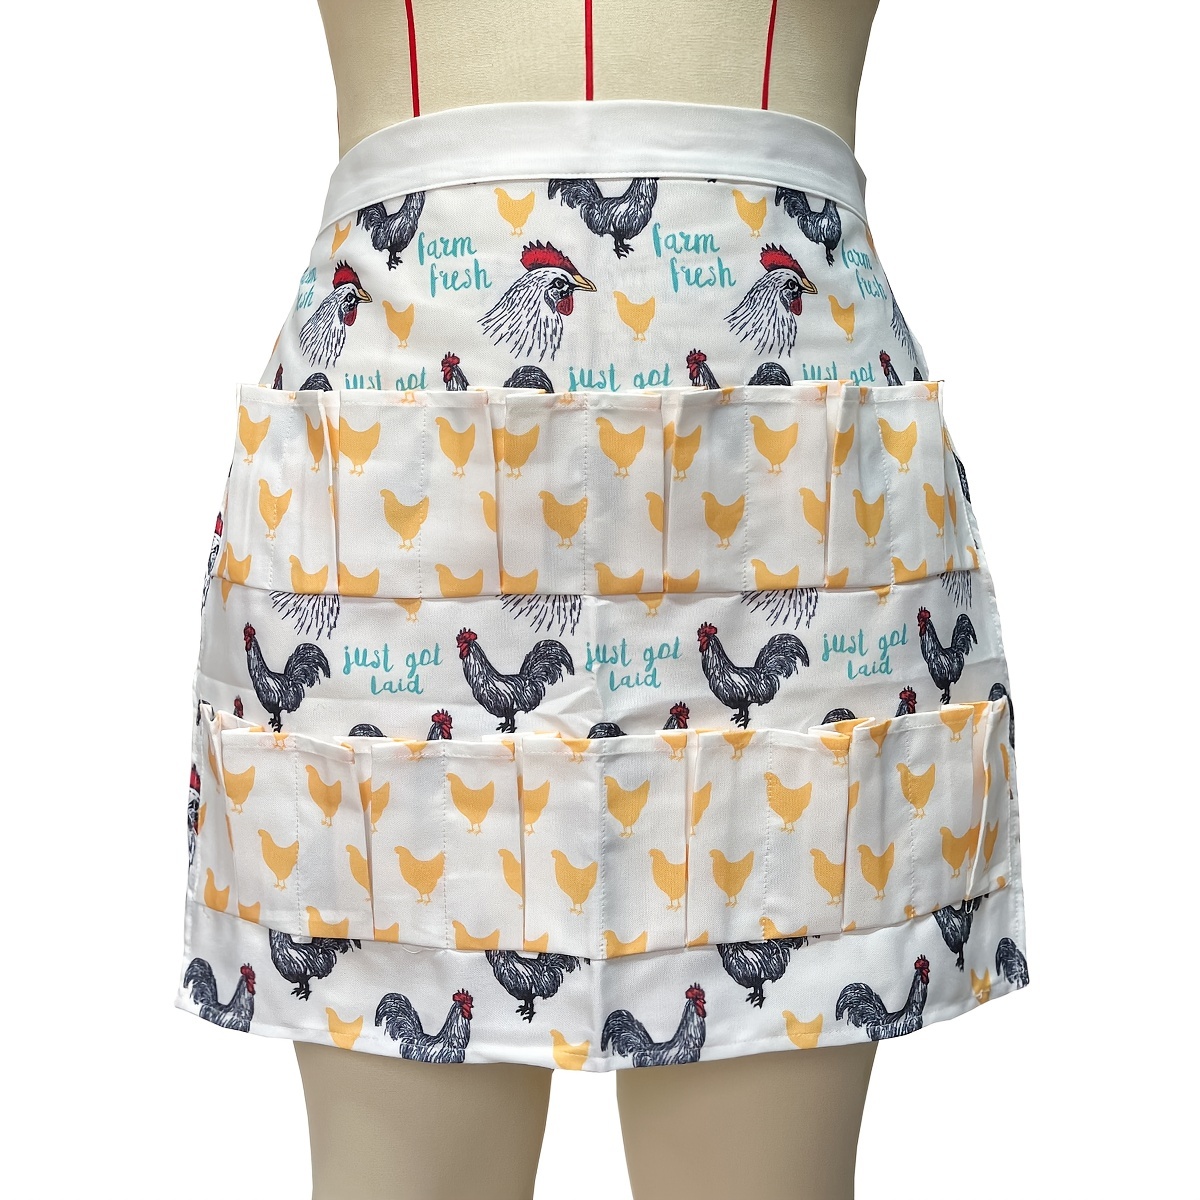 Multi-pocket Egg Collecting Apron Fresh Goose Chicken Eggs Collect